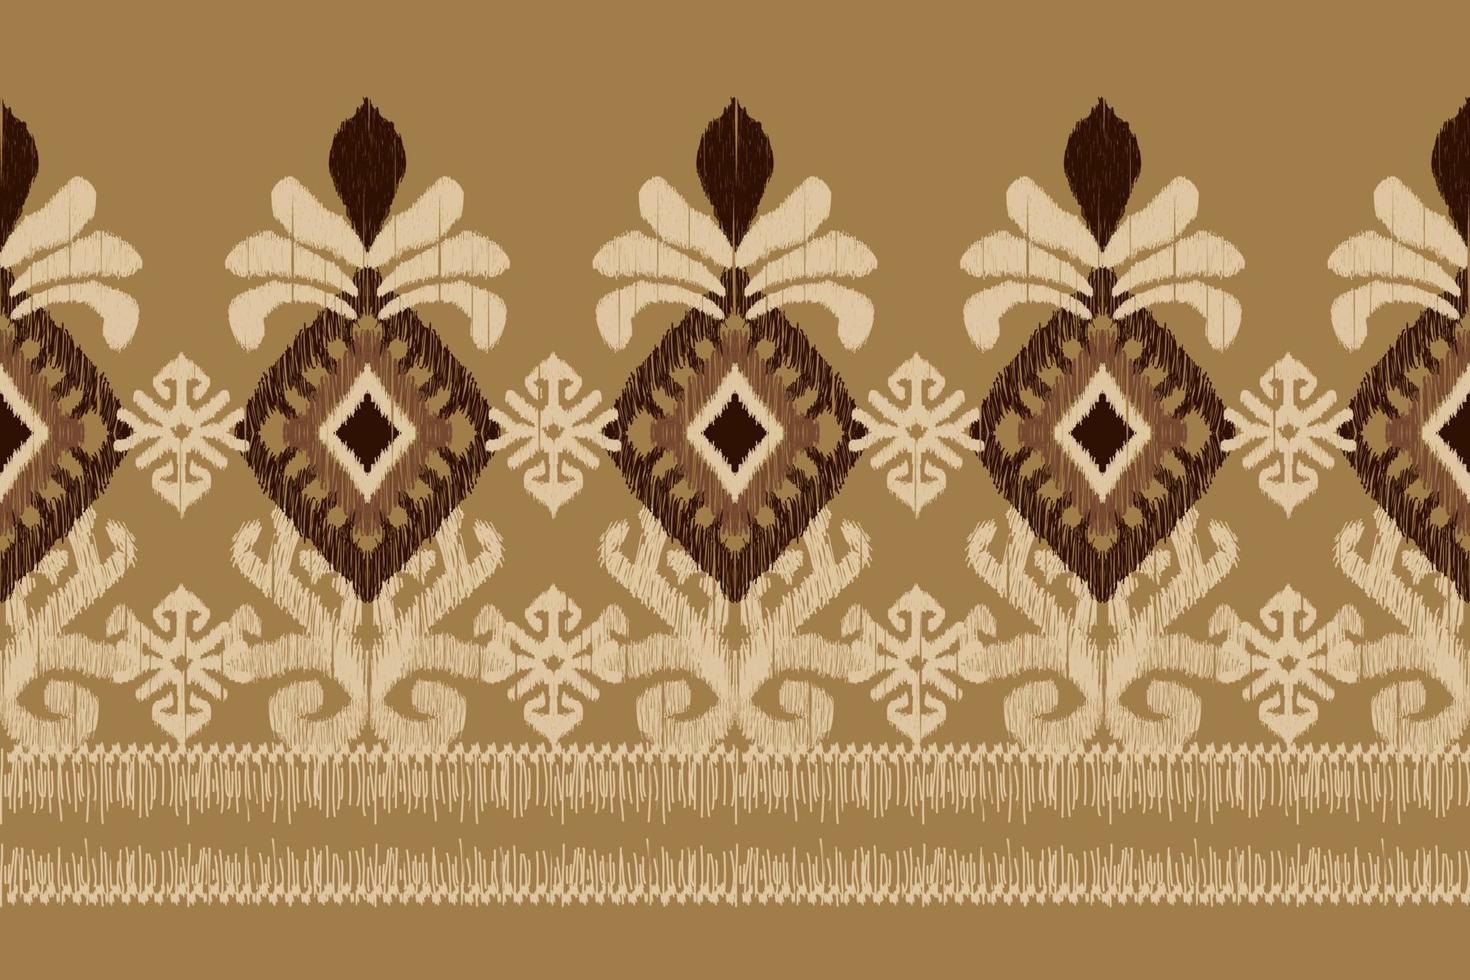 Ikat floral paisley embroidery on brown background.geometric ethnic oriental pattern traditional.Aztec style abstract vector illustration.design for texture,fabric,clothing,wrapping,decoration,scarf.